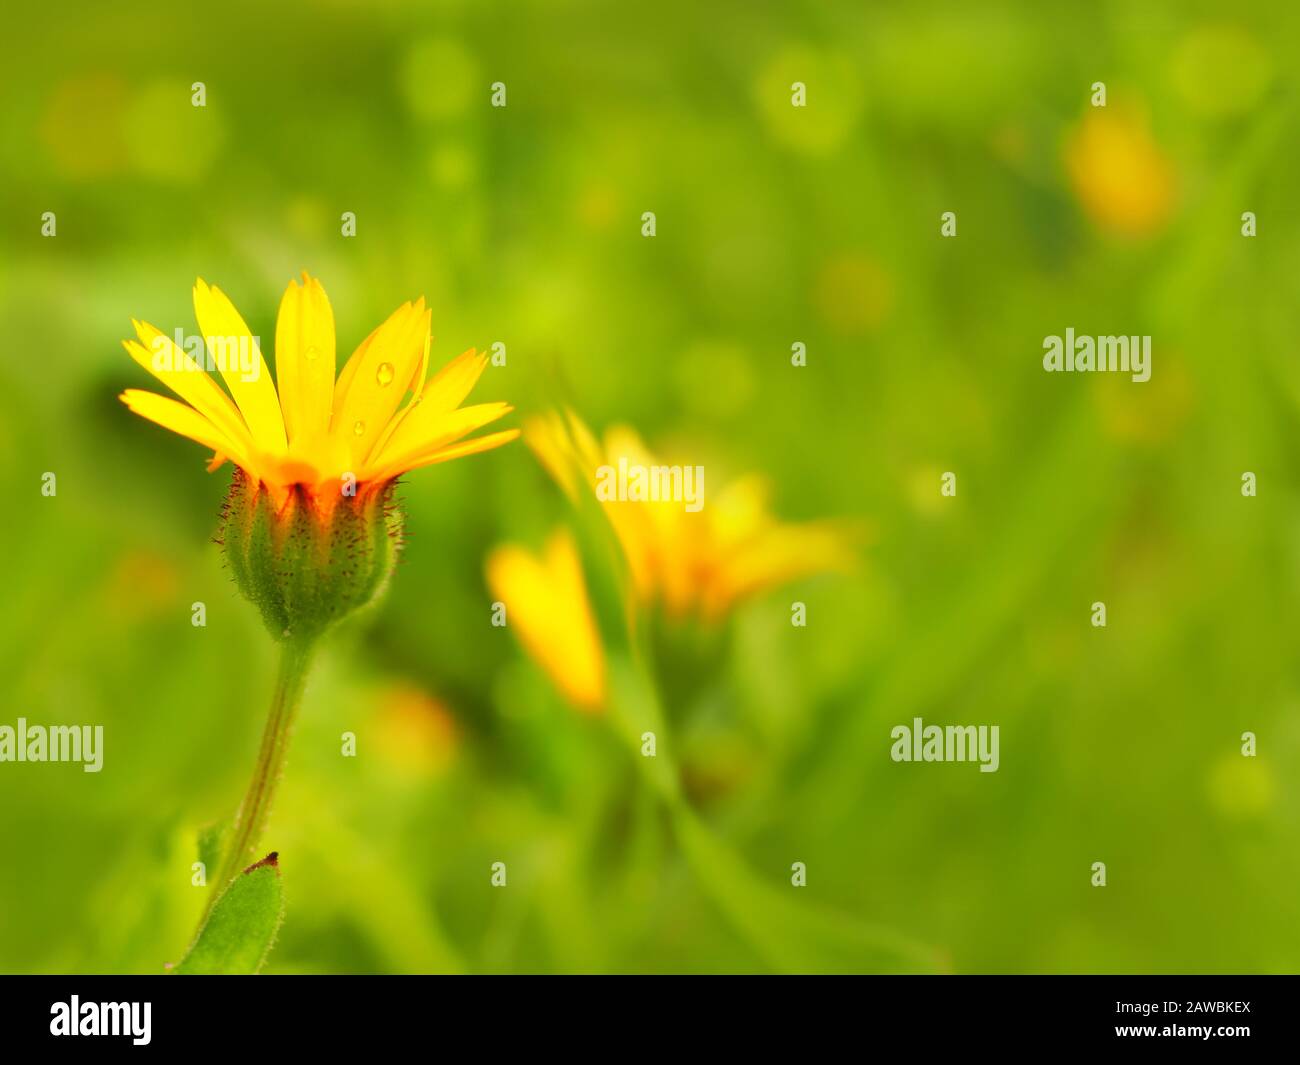 Beautiful calendula arvensis on a bright green blurry background. Artistic photo with defocus. Stock Photo